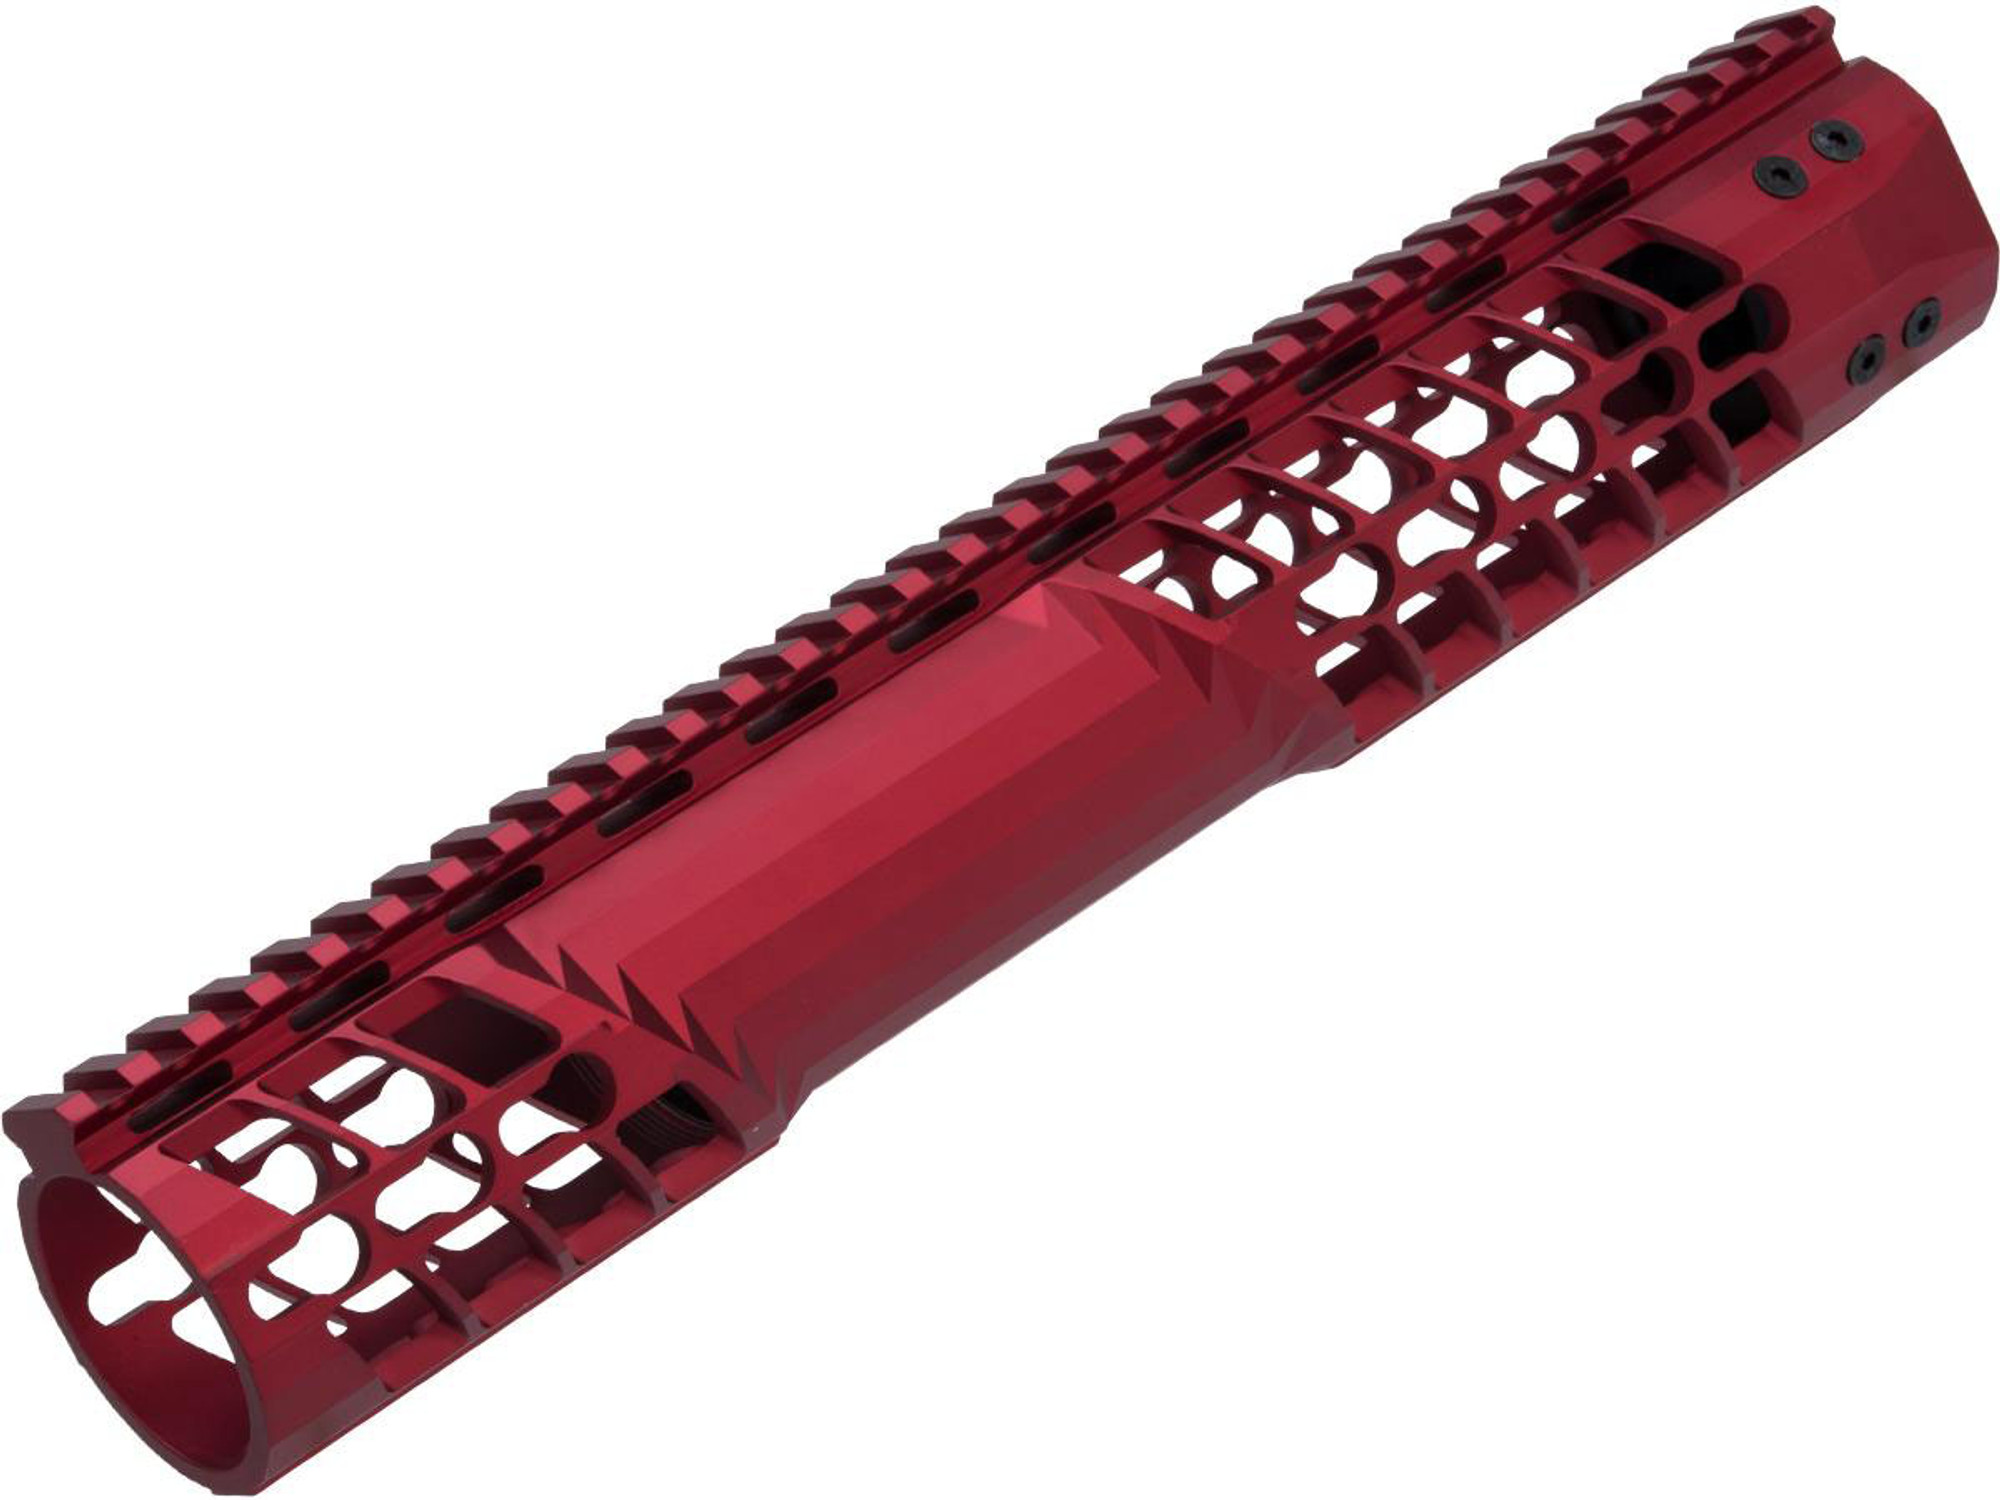 EMG F-1 Firearms Officially Licensed BDR Keymod Handguard for M4/M16 Series Airsoft AEGs (Color: Red / 12.75")